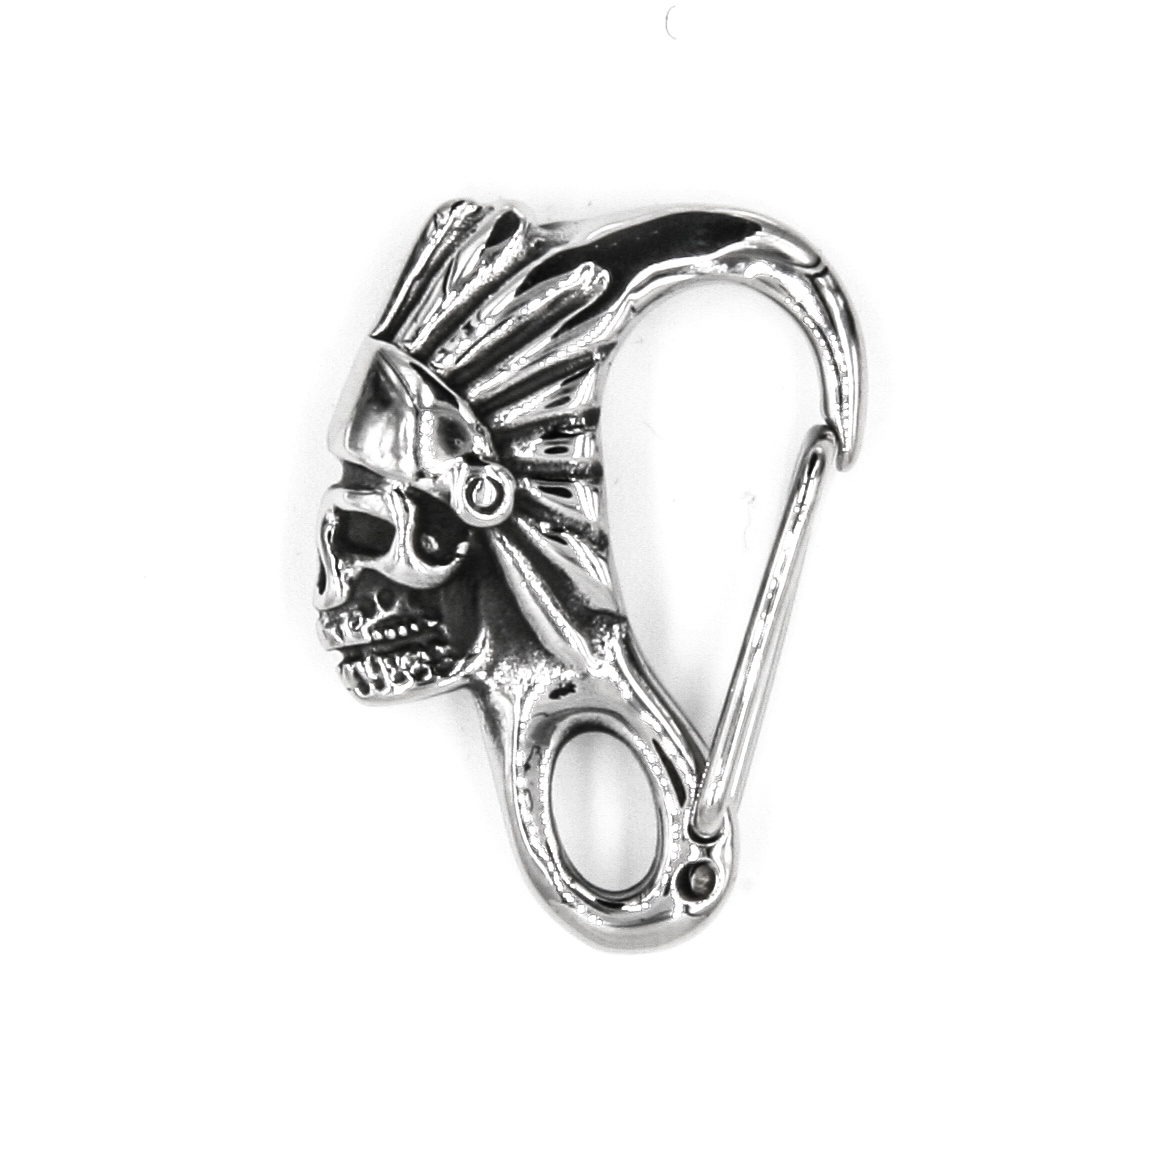 Wallet Chains With A Skull Clasp – SS Biker / Rock Star Rings